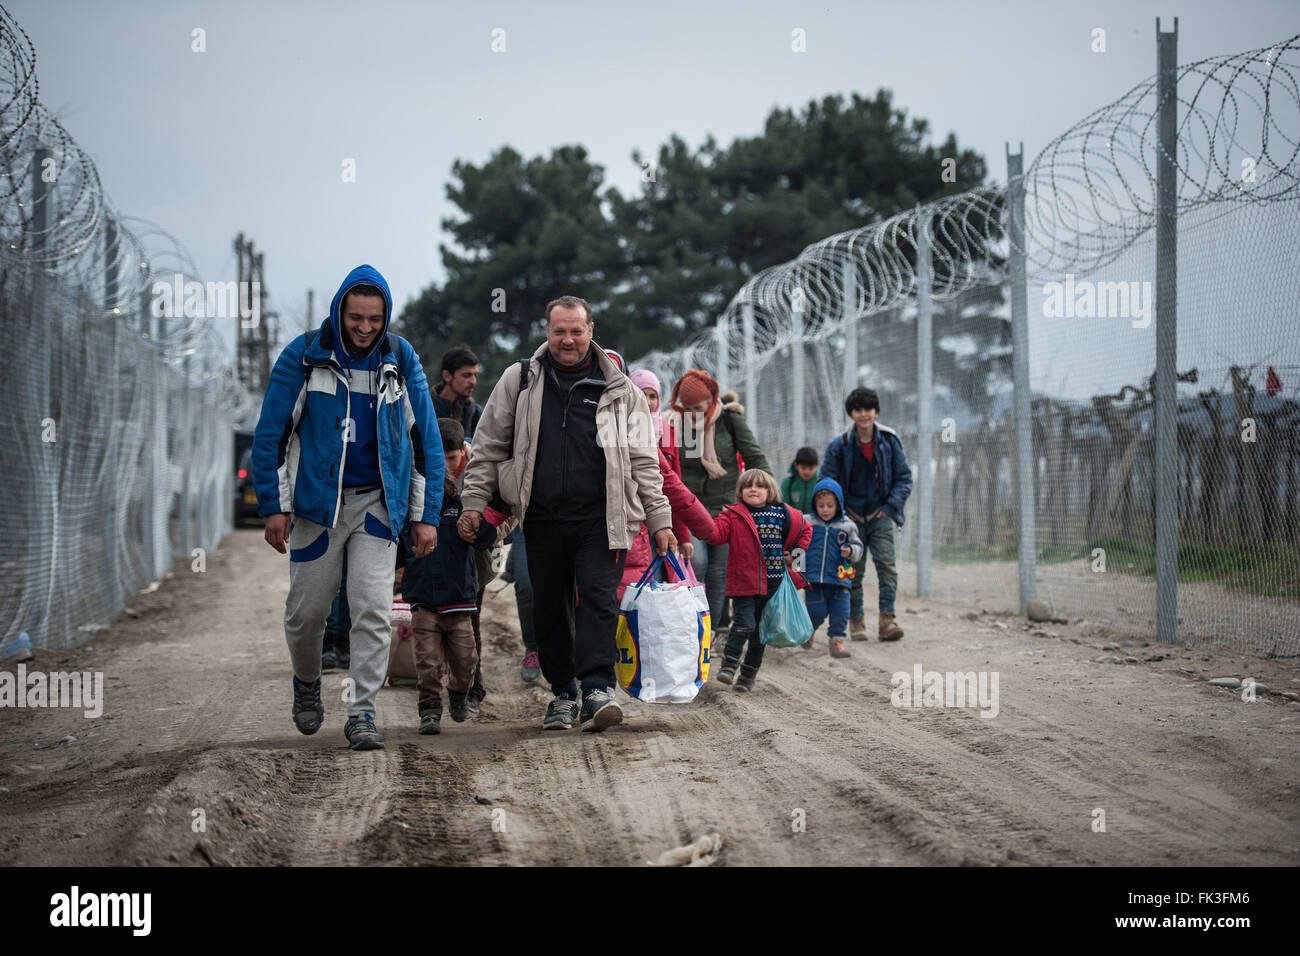 Gevgelija, Macedonia. 06th Mar, 2016. Migrants reach the camp of Gevgelija after entering Macedonia. Migrants on the way to the camp of Gevgelija in Macedonia welcomed in the camp of Idomeni in Greece waiting to get past the checkpoint at the greek-Macedonian border. Conditions of extreme difficulty at the Idomeni's camp where the population exceeded 10,000 units. At the moment there are about 400 refugees crossing the border in the direction of the camp of Gevgelija in Macedonia to continue their journey North into Western Europe. Credit:  Ivan Romano/Pacific Press/Alamy Live News Stock Photo